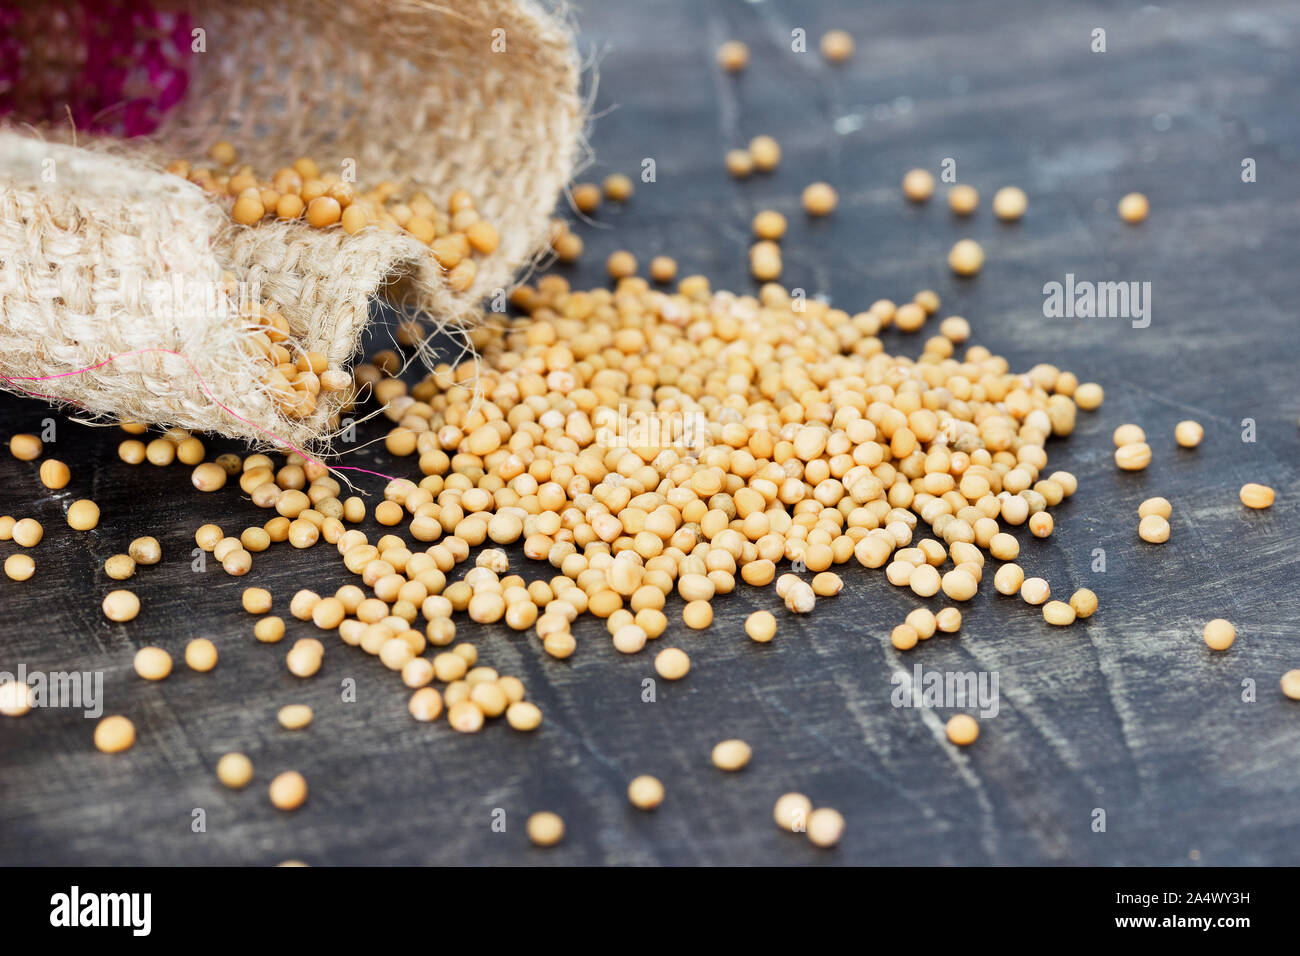 Spilled from the bag of yellow mustard seeds Stock Photo